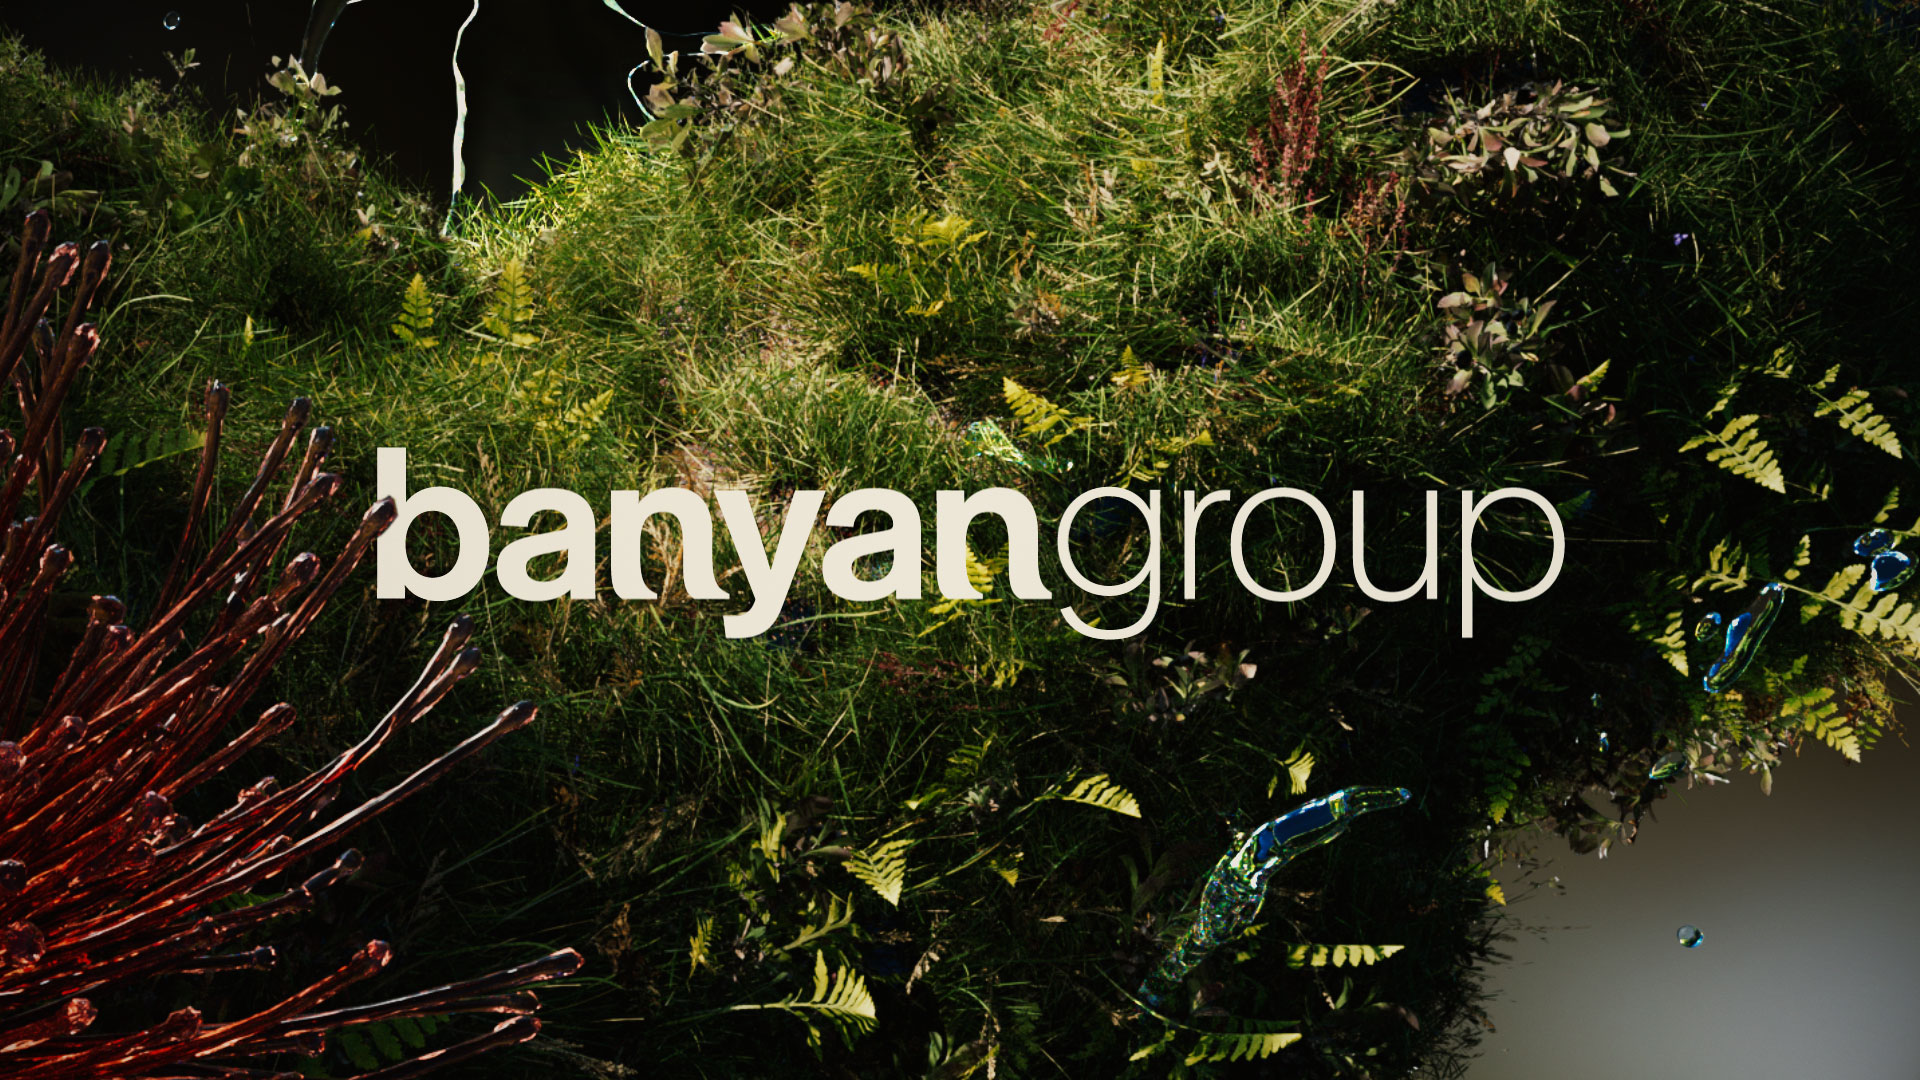 Anak’s Vision for Banyan Group’s New Brand World